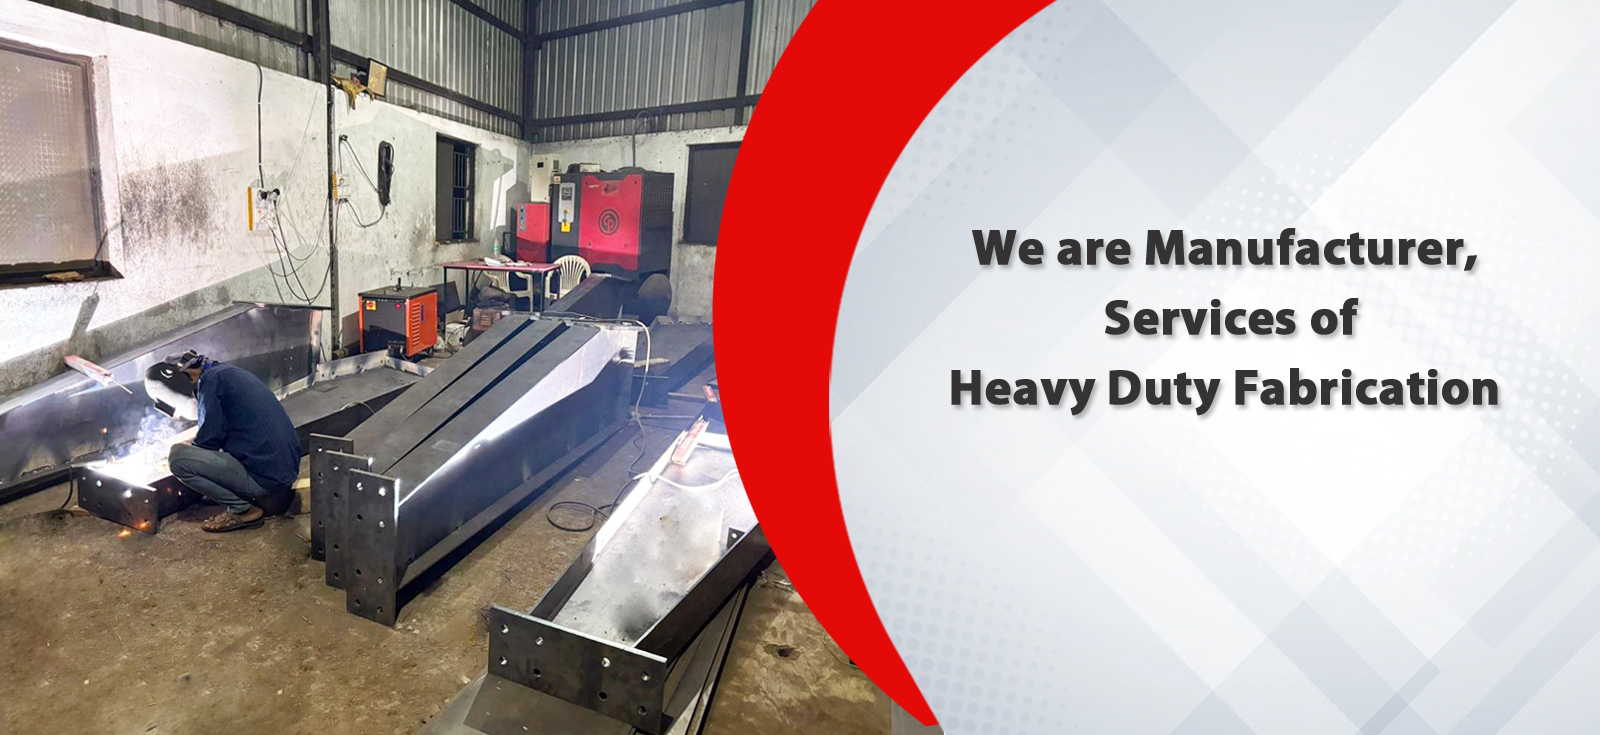 Manufacturer of Heavy Duty Fabrication